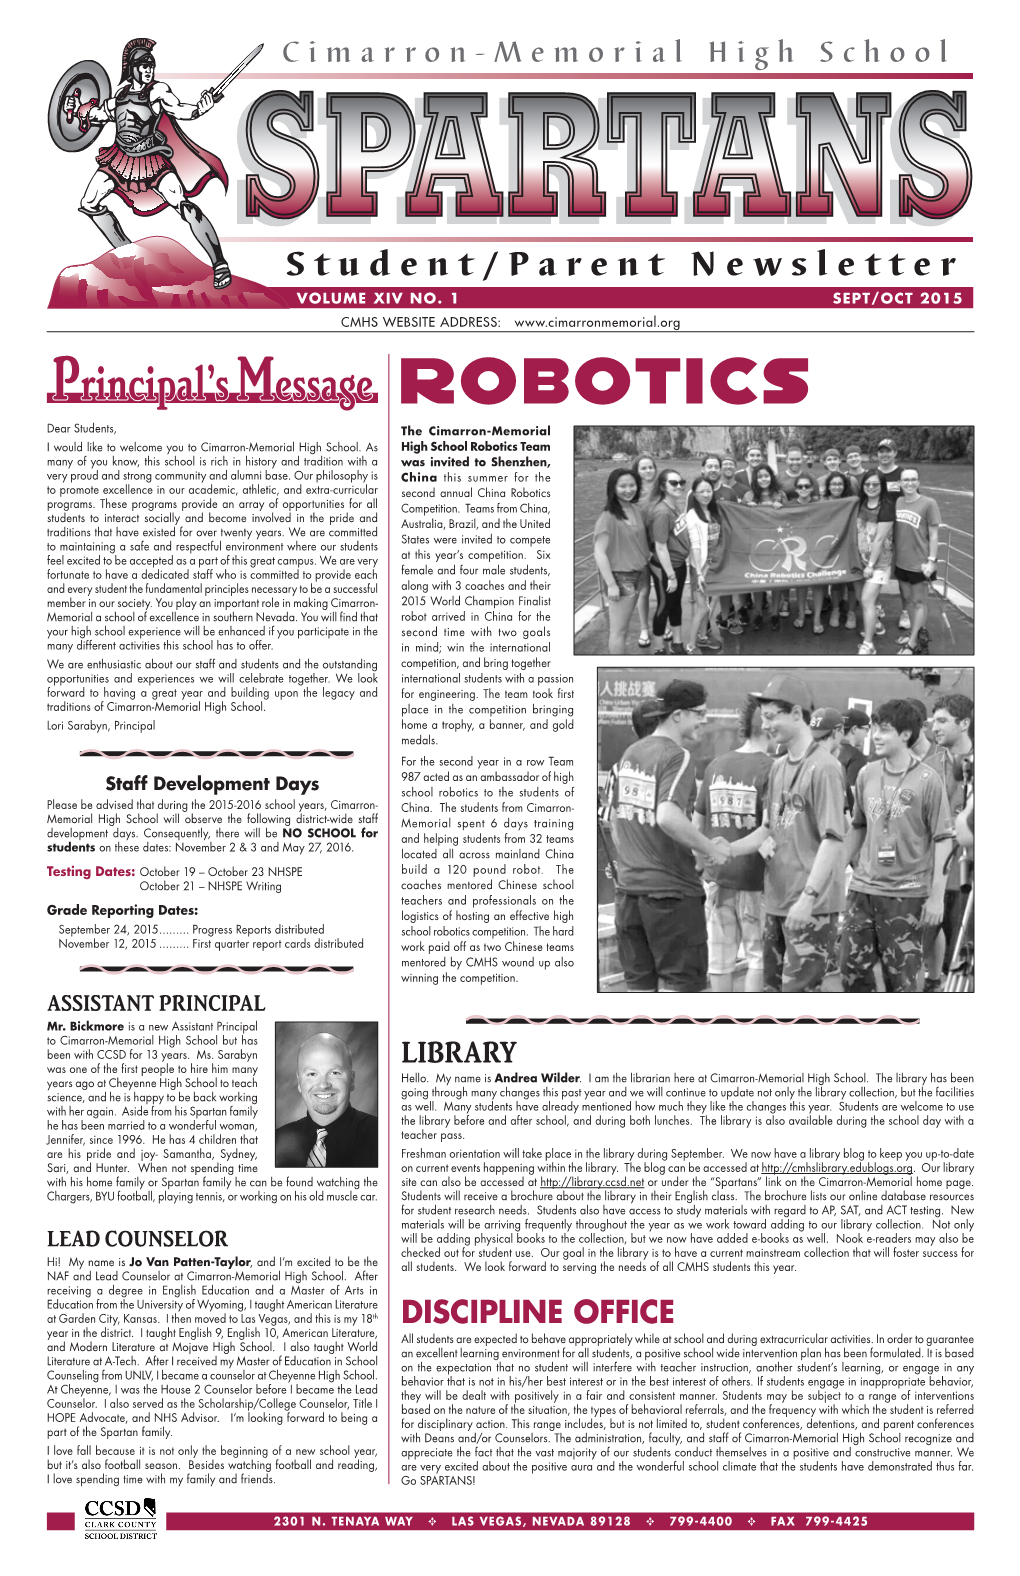 ROBOTICS Dear Students, the Cimarron-Memorial I Would Like to Welcome You to Cimarron-Memorial High School